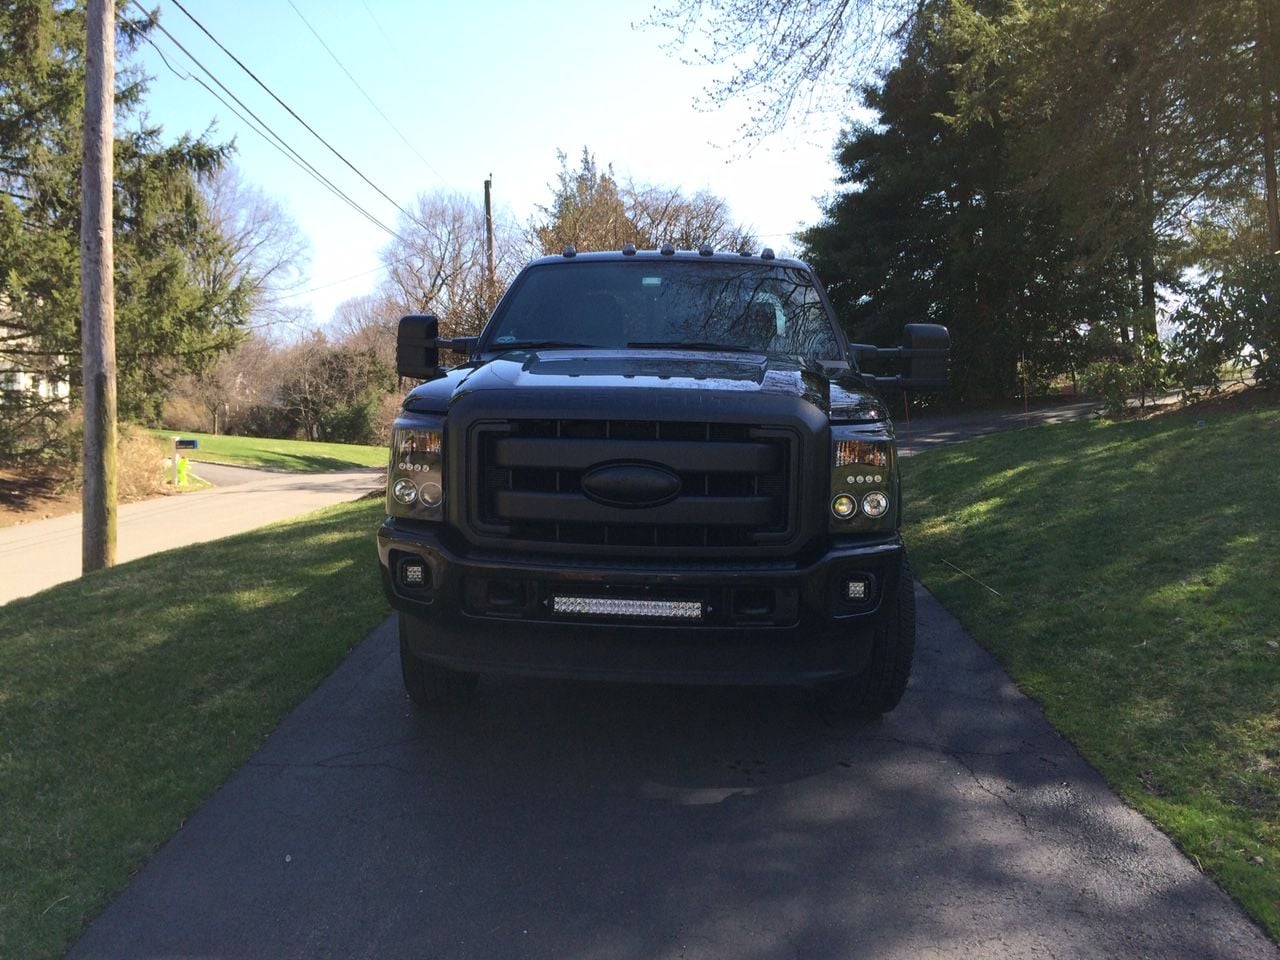 2014 Ford F-250 Super Duty - 2014 F250 Platinum ANZO Smoked LED Light Kit - Complete $600 OBO - Darien, CT 06820, United States